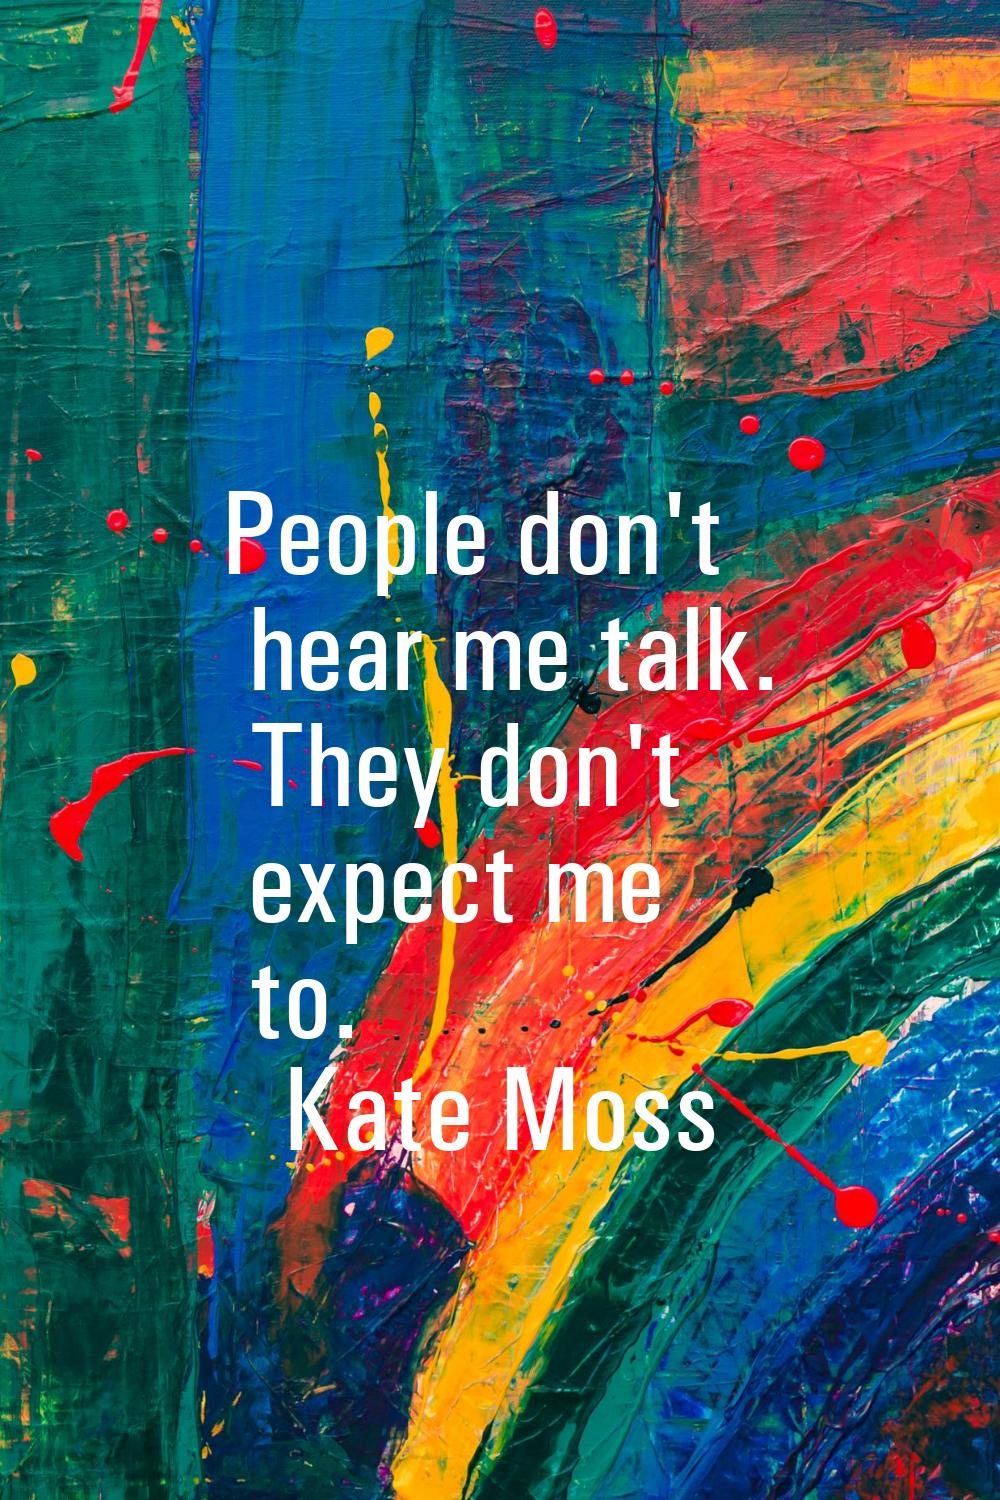 People don't hear me talk. They don't expect me to.